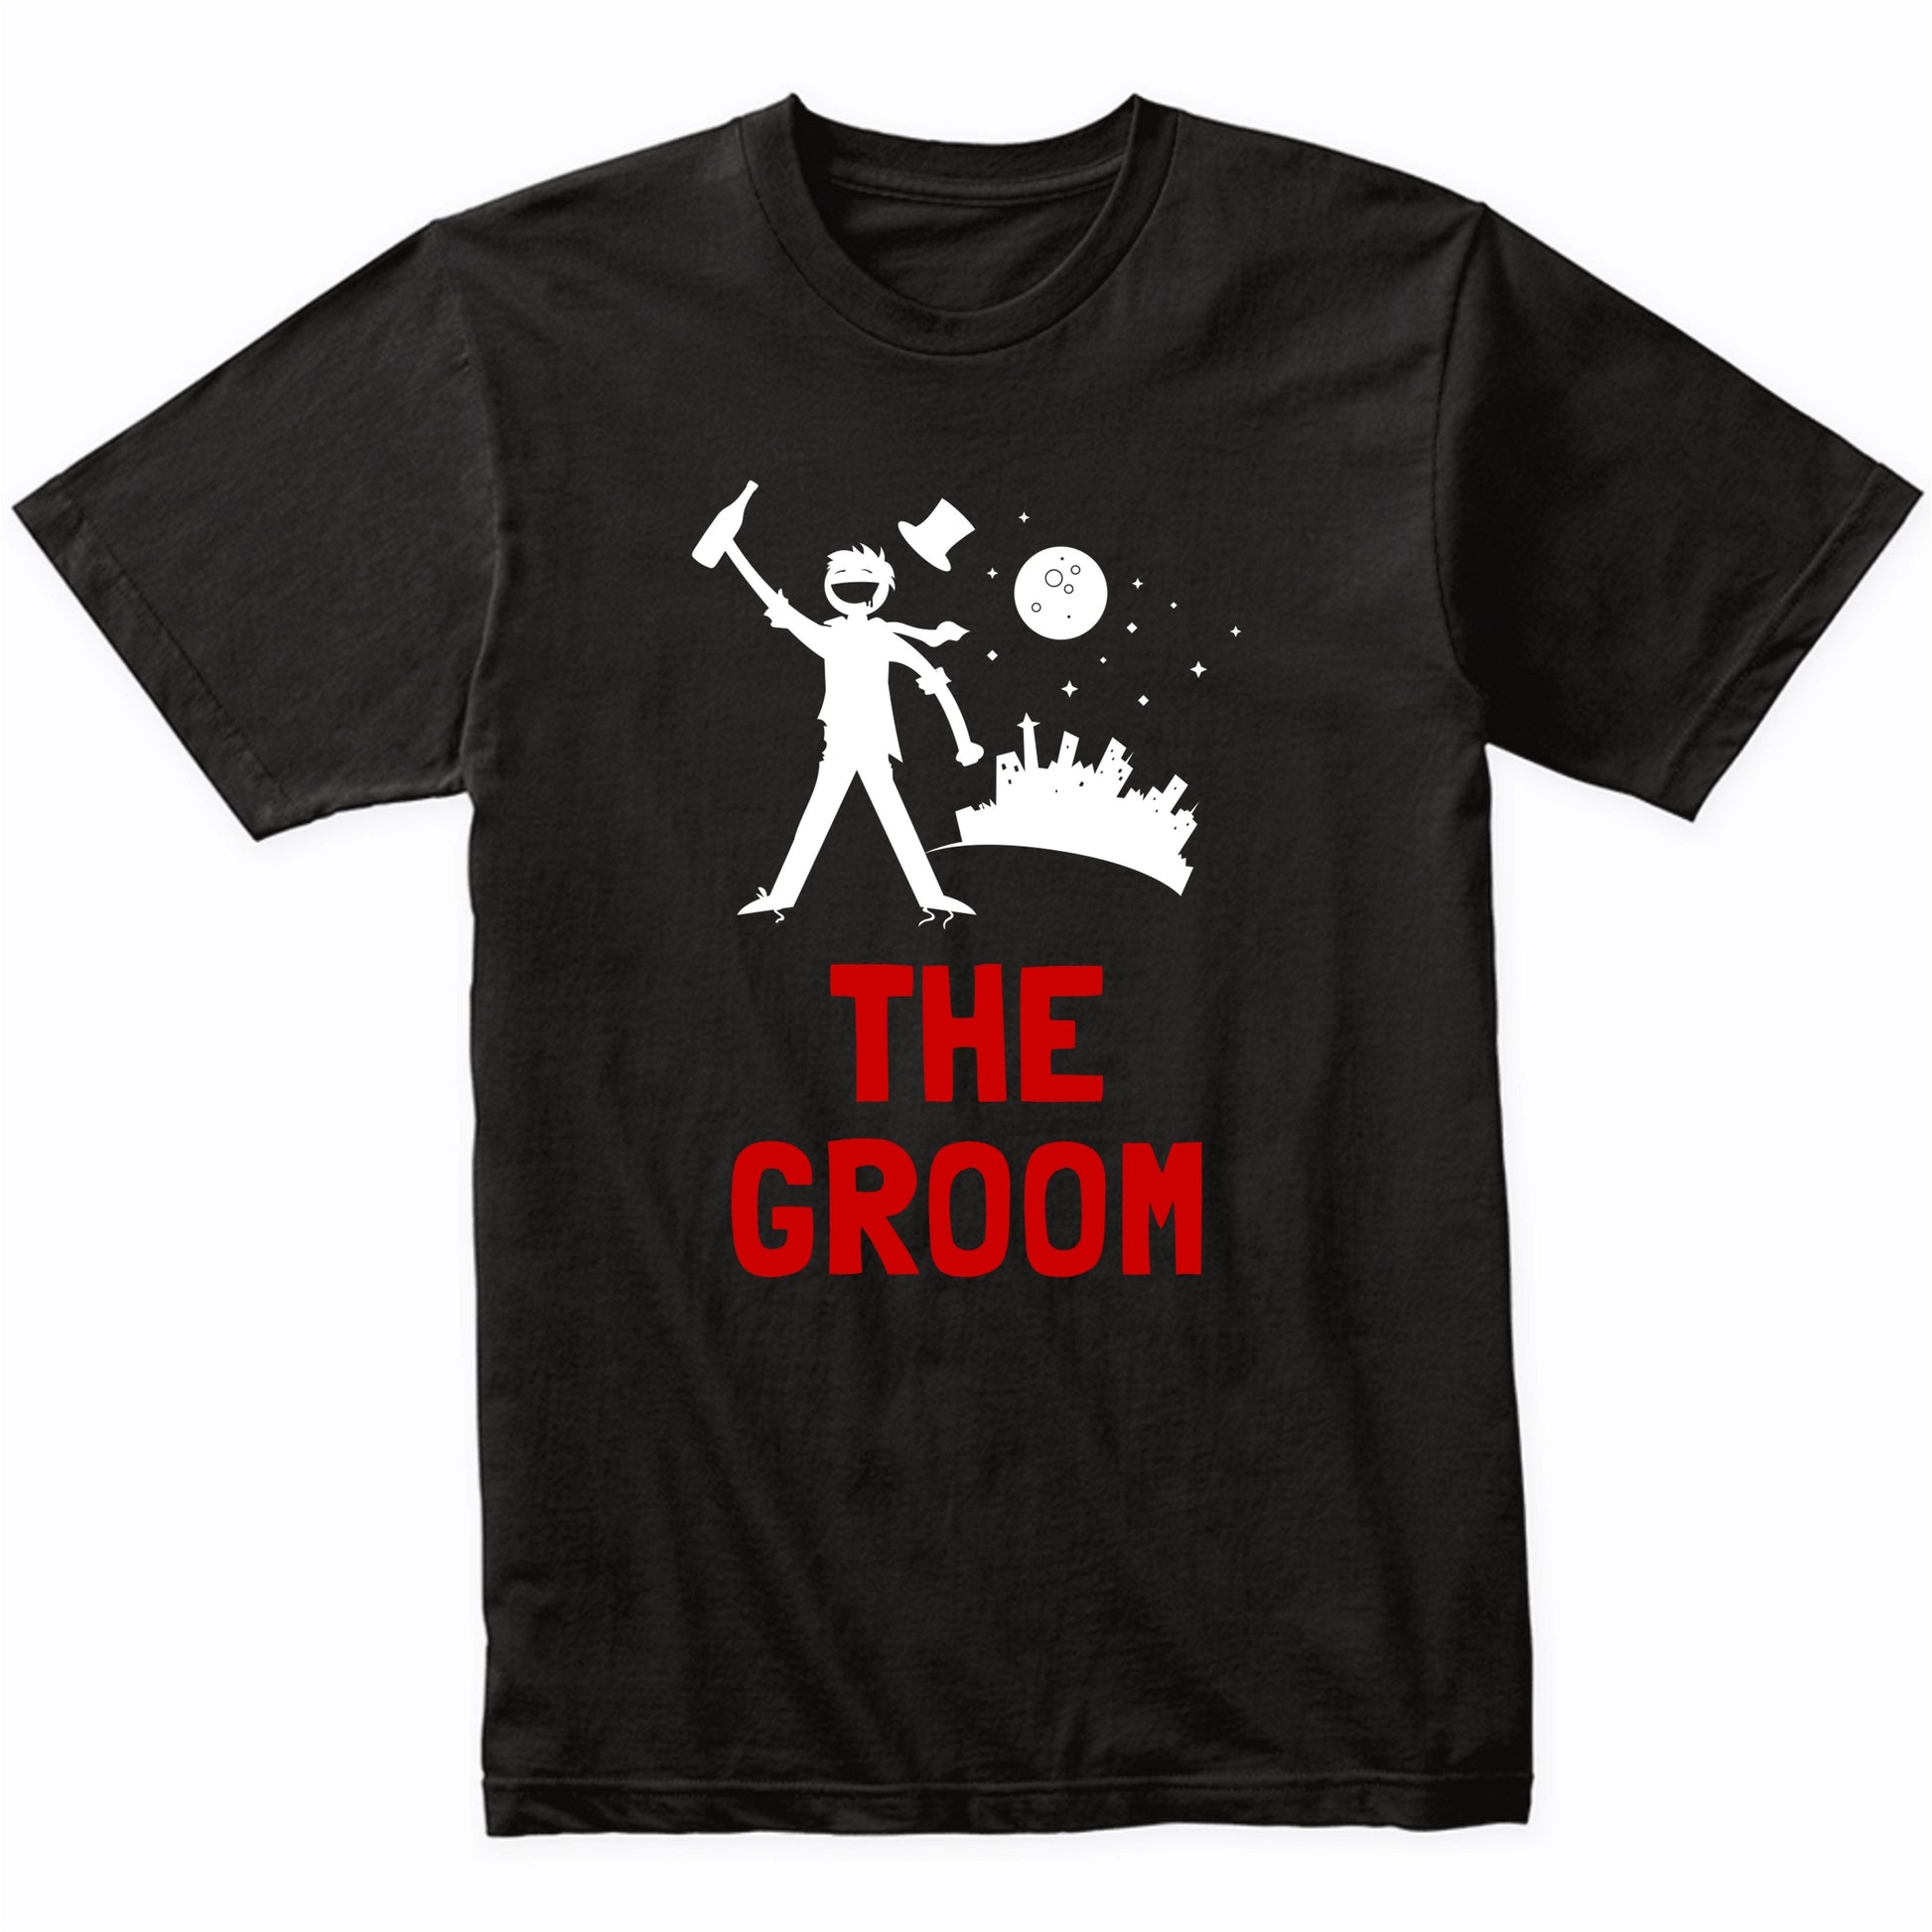 The Groom Shirt - Bachelor Party Drinking T-Shirt